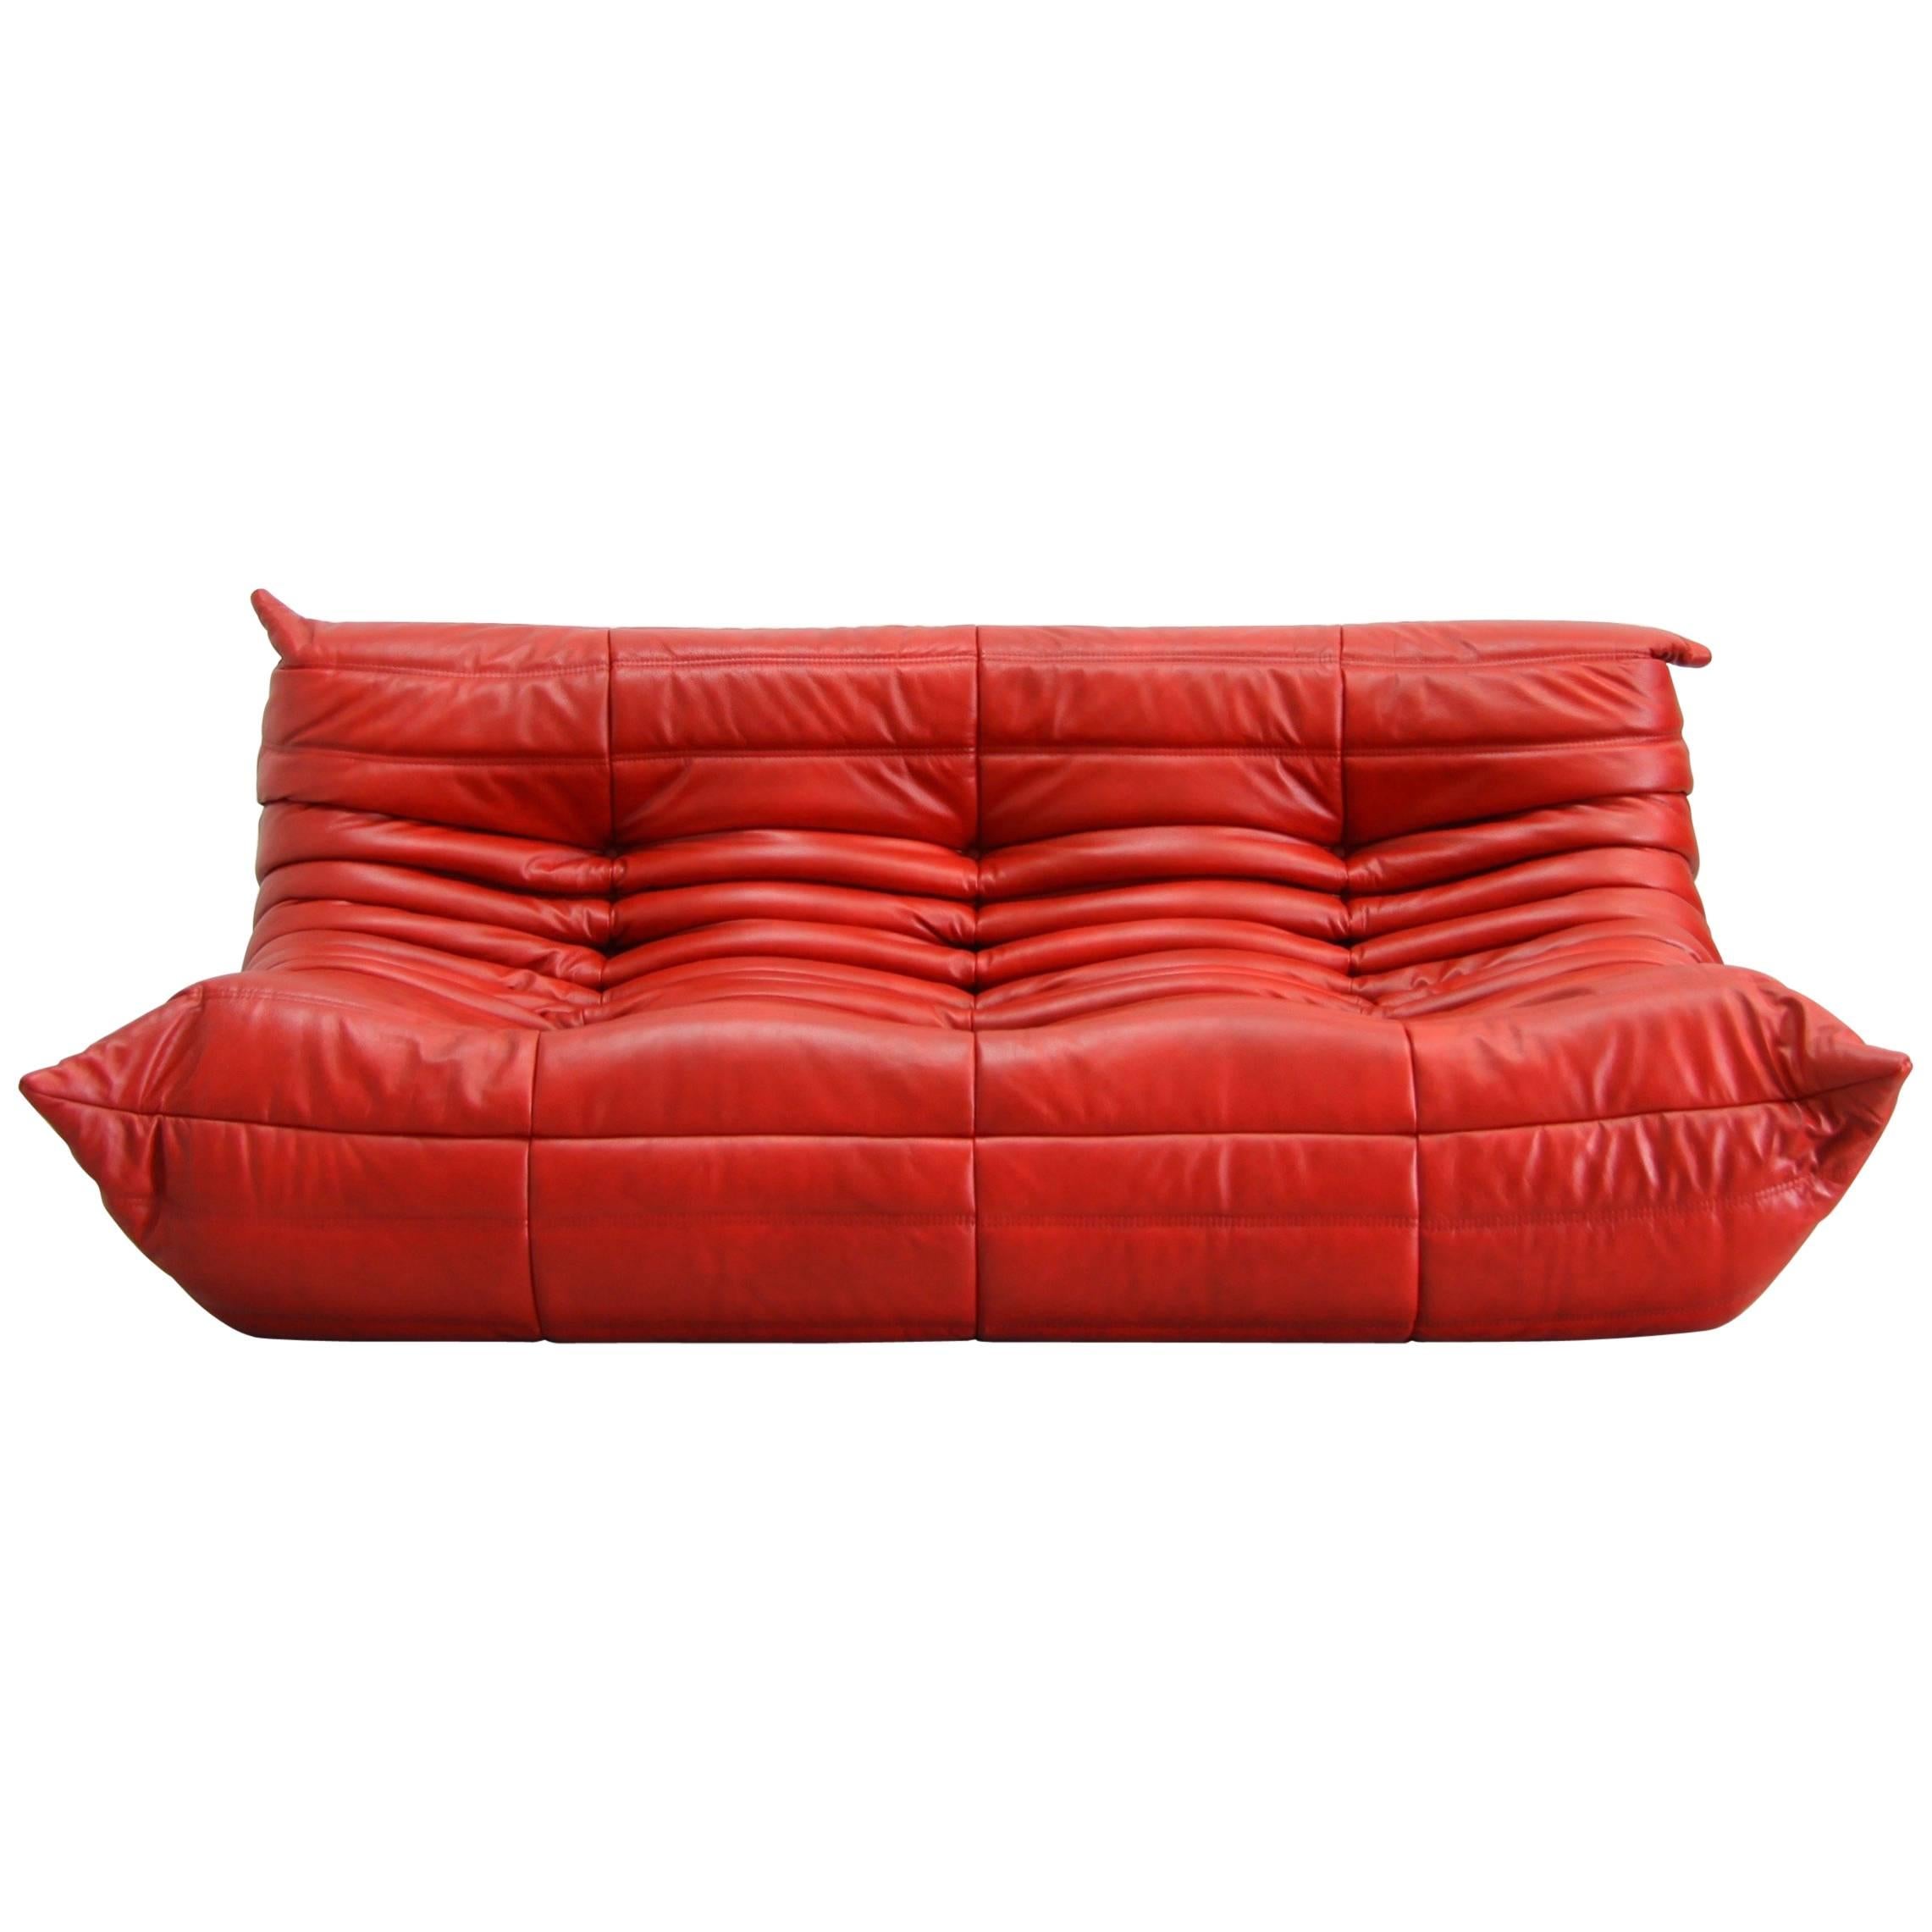 Red Leather Togo Sofa by Michel Ducaroy for Ligne Roset, 1974, Red Leather Togo